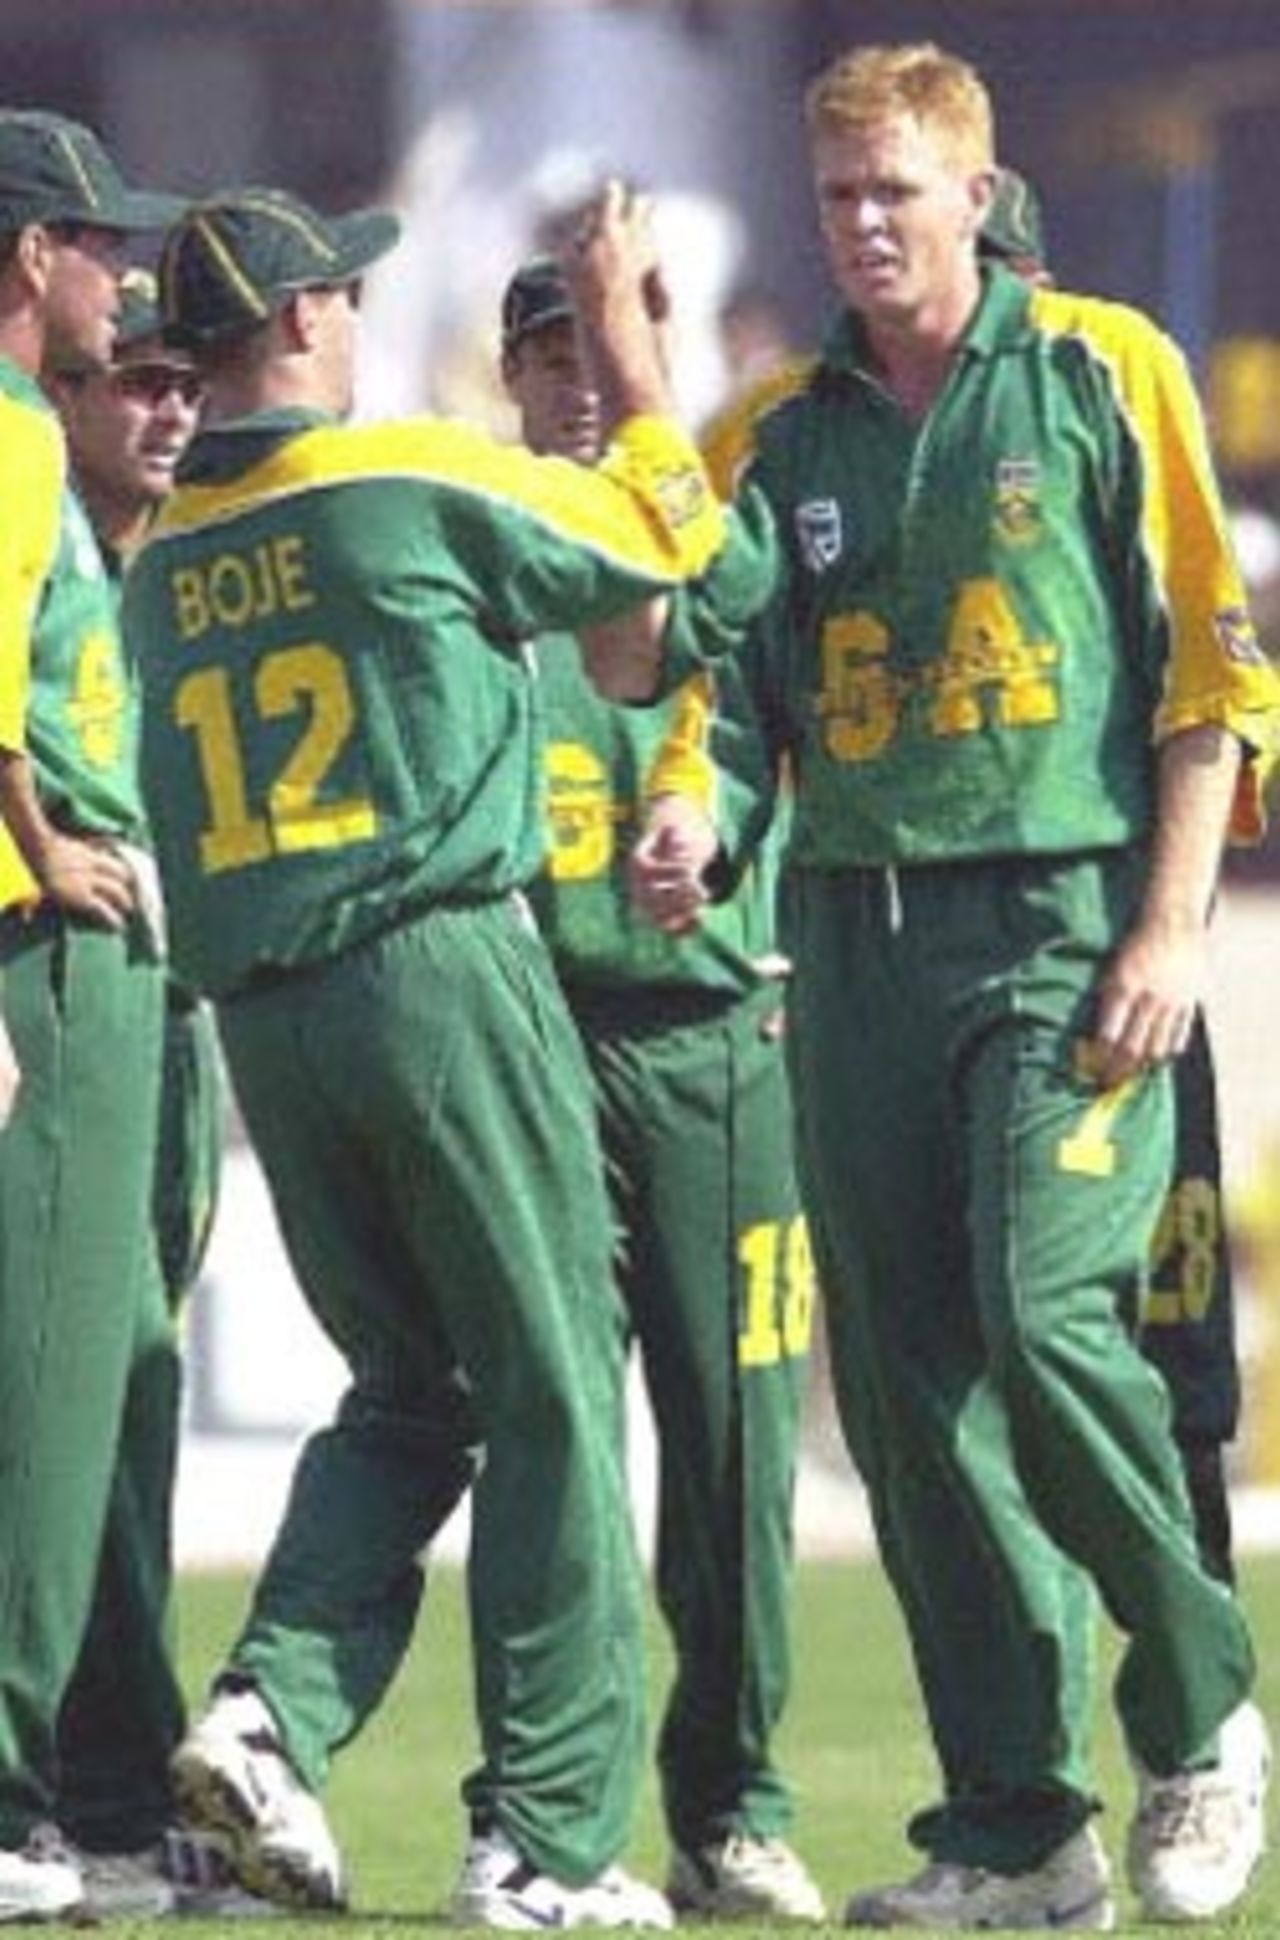 South African cricketer Nicky Boje (No.12) congratulates team-mate Shuan Pollock (R) for claiming Indian batsman Sachin Tendulkar's wicket as the rest of the team join in to celebrate during the third one-day cricket international between India and South Africa played at Faridabad, 15 March 2000. South Africa went on to beat India by two wickets in a close finish.